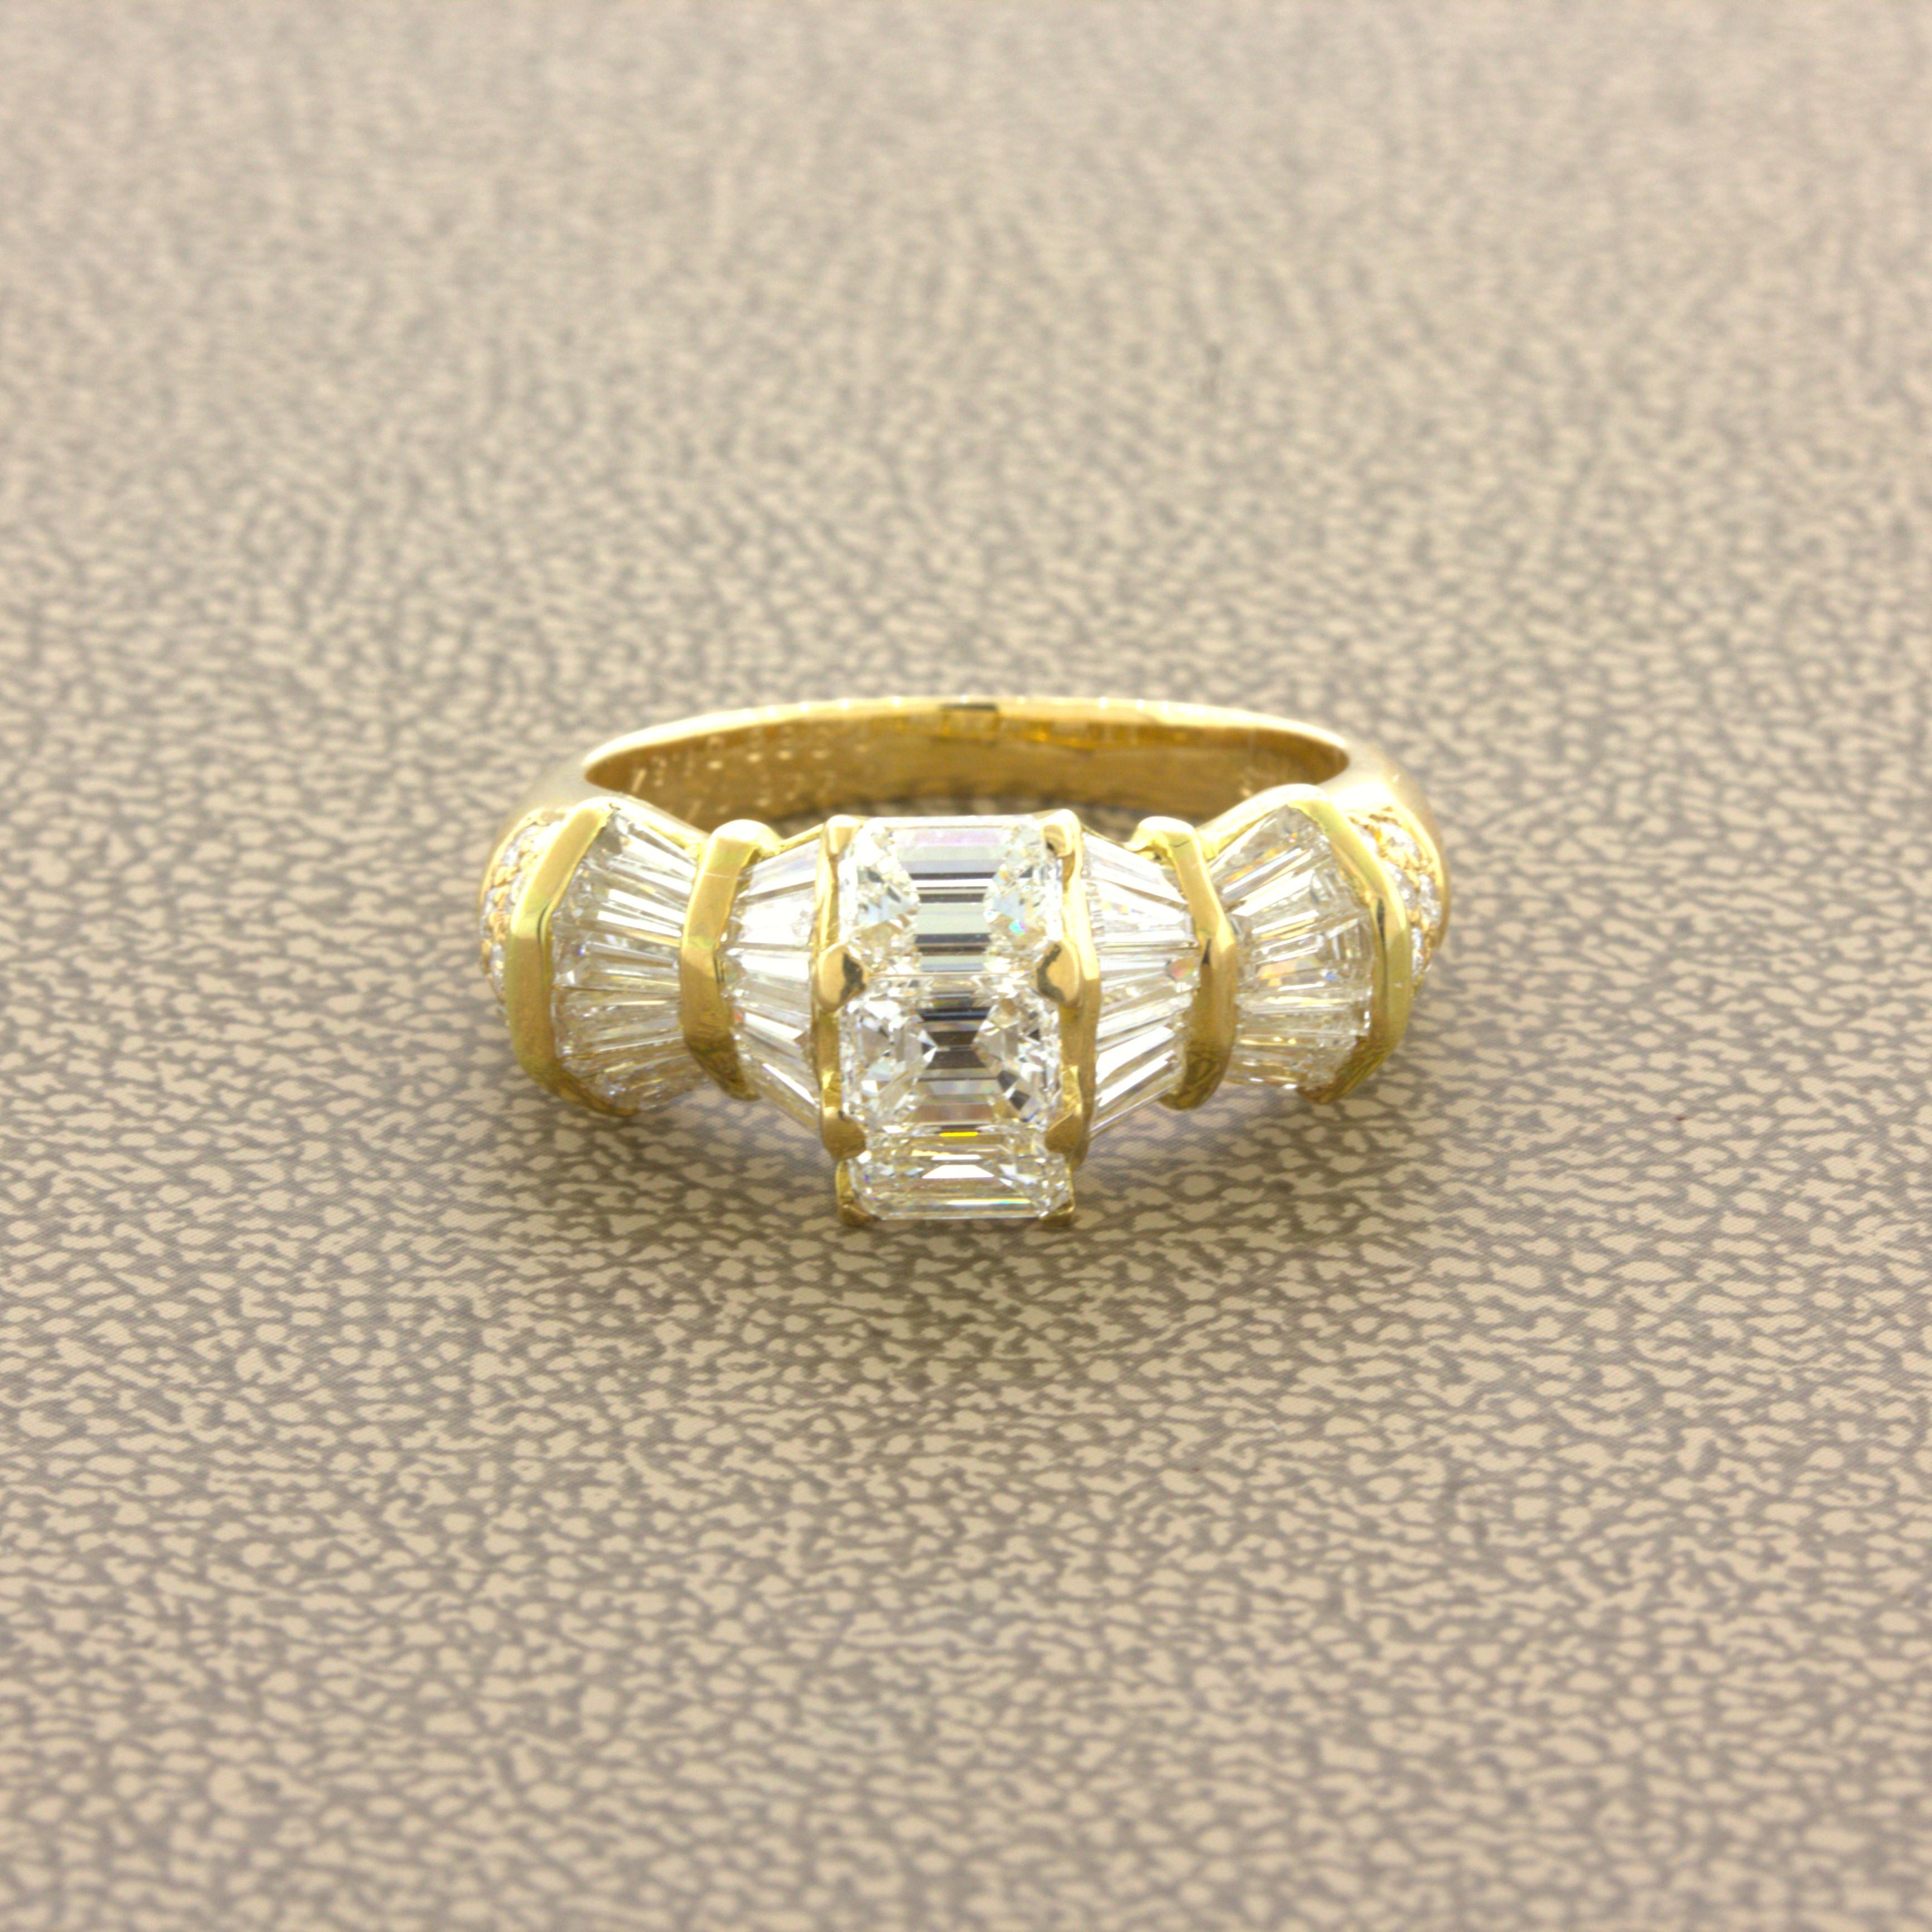 An elegant and unique diamond ring! It features 3 large bright white VS emerald-cut diamonds running vertically down the center of the piece. Adding to that are angled baguette-cut diamonds and round brilliant-cut diamonds set on the sides of the